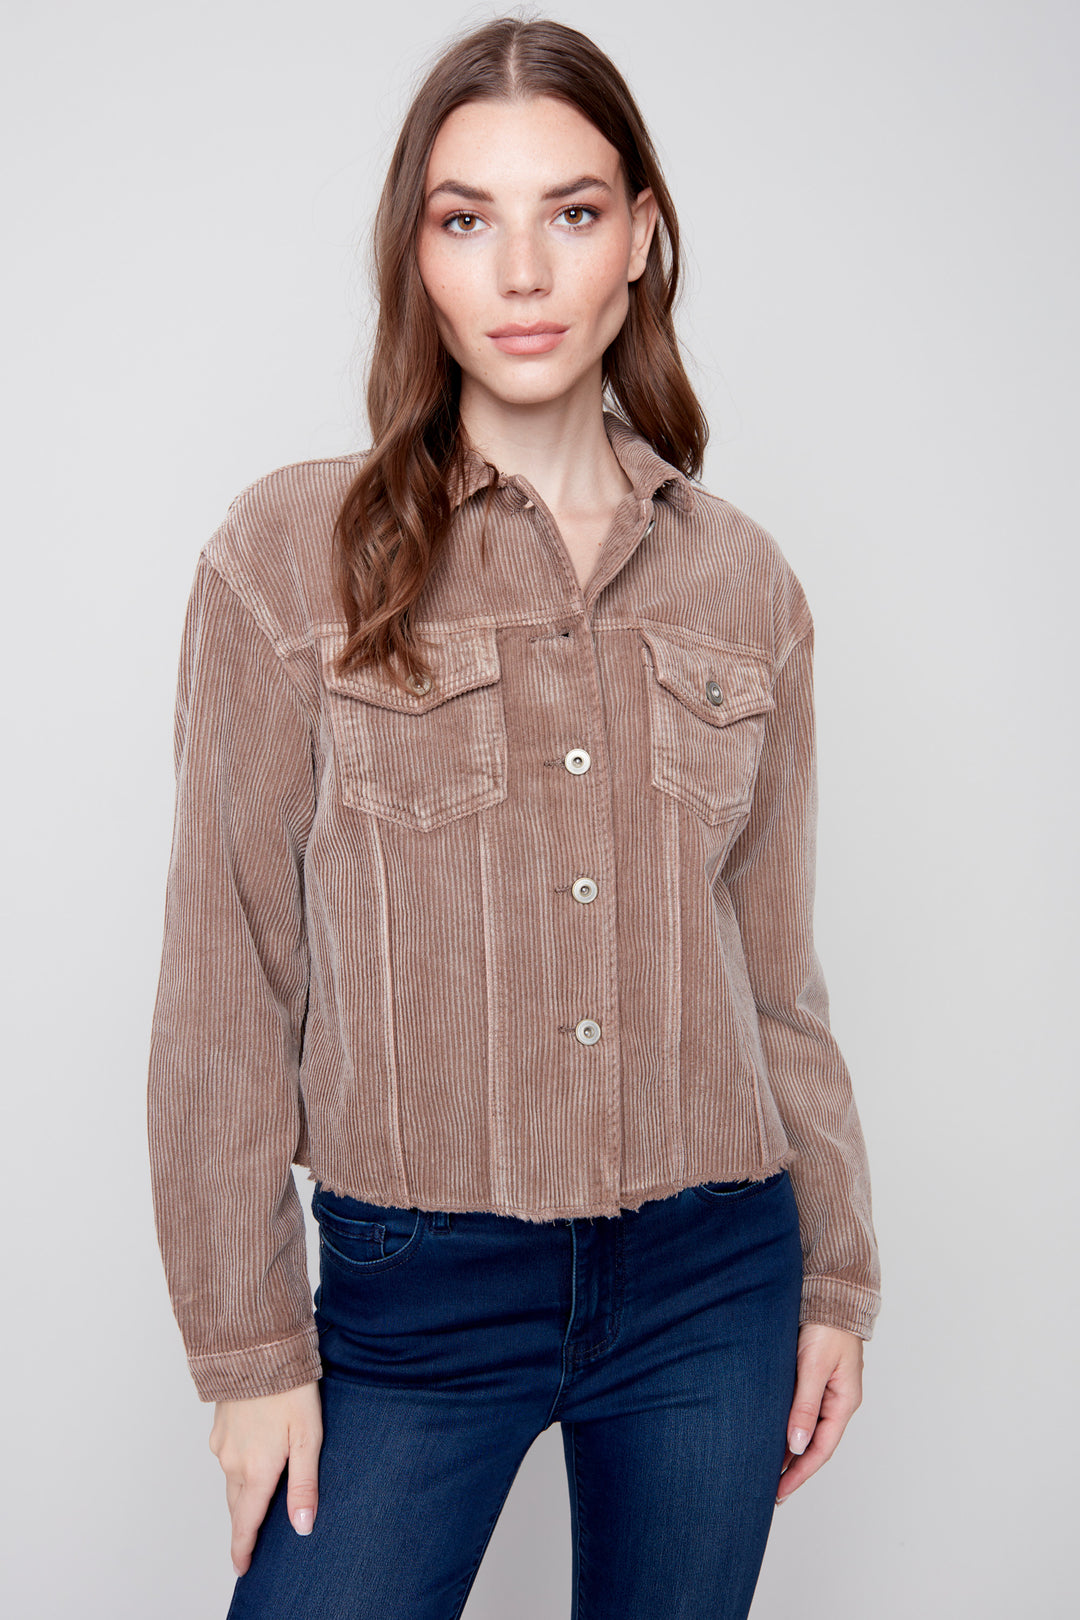 This 100% cotton Washed Cord Jacket is designed with washed-out corduroy and a raw-edge hem. Its button-front and pockets provide ample utility for all your needs.